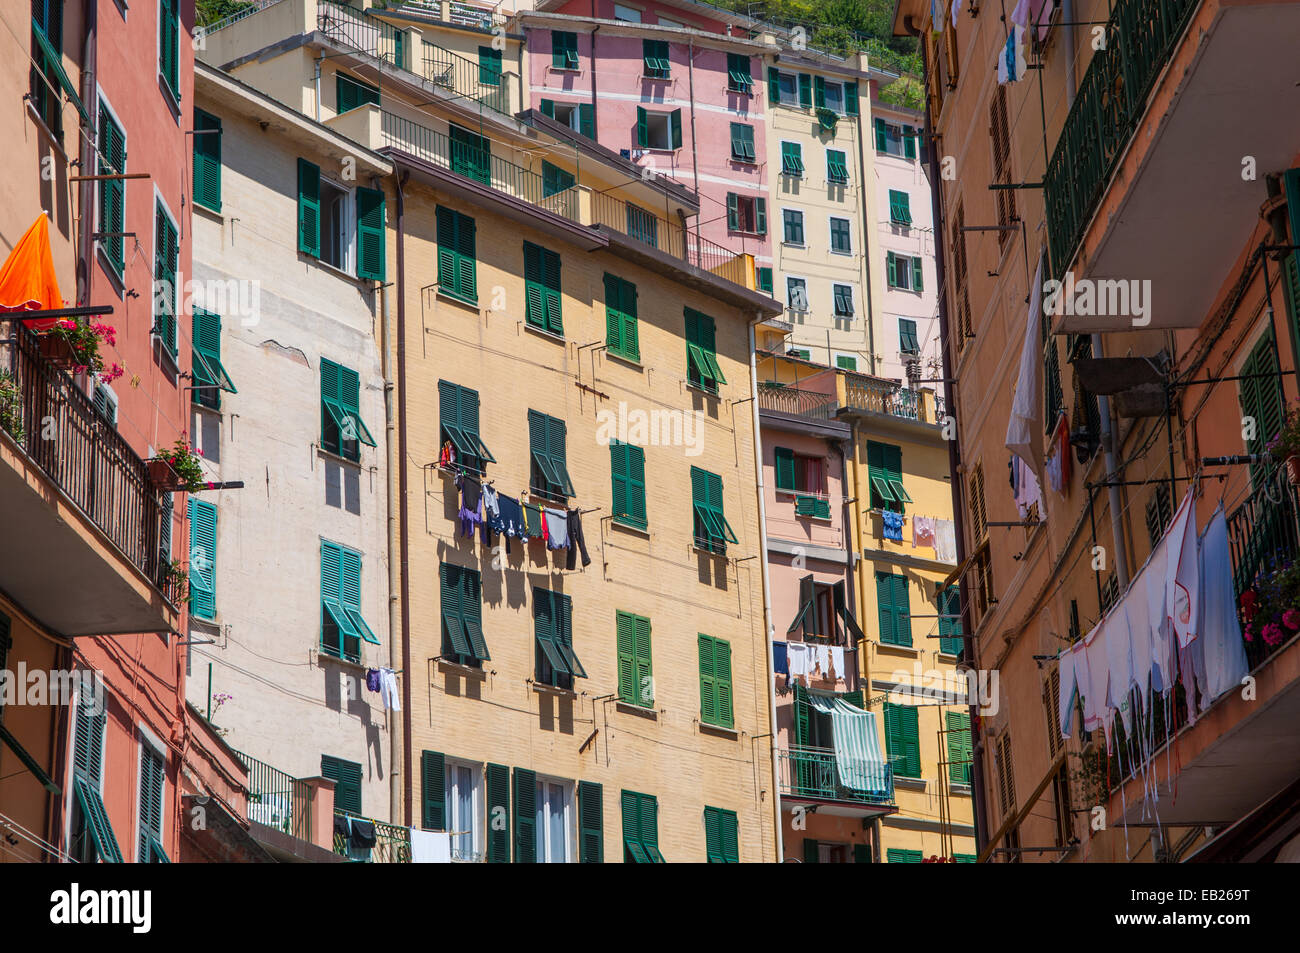 Colorful Homes in Cinque Terre Italy Stock Photo